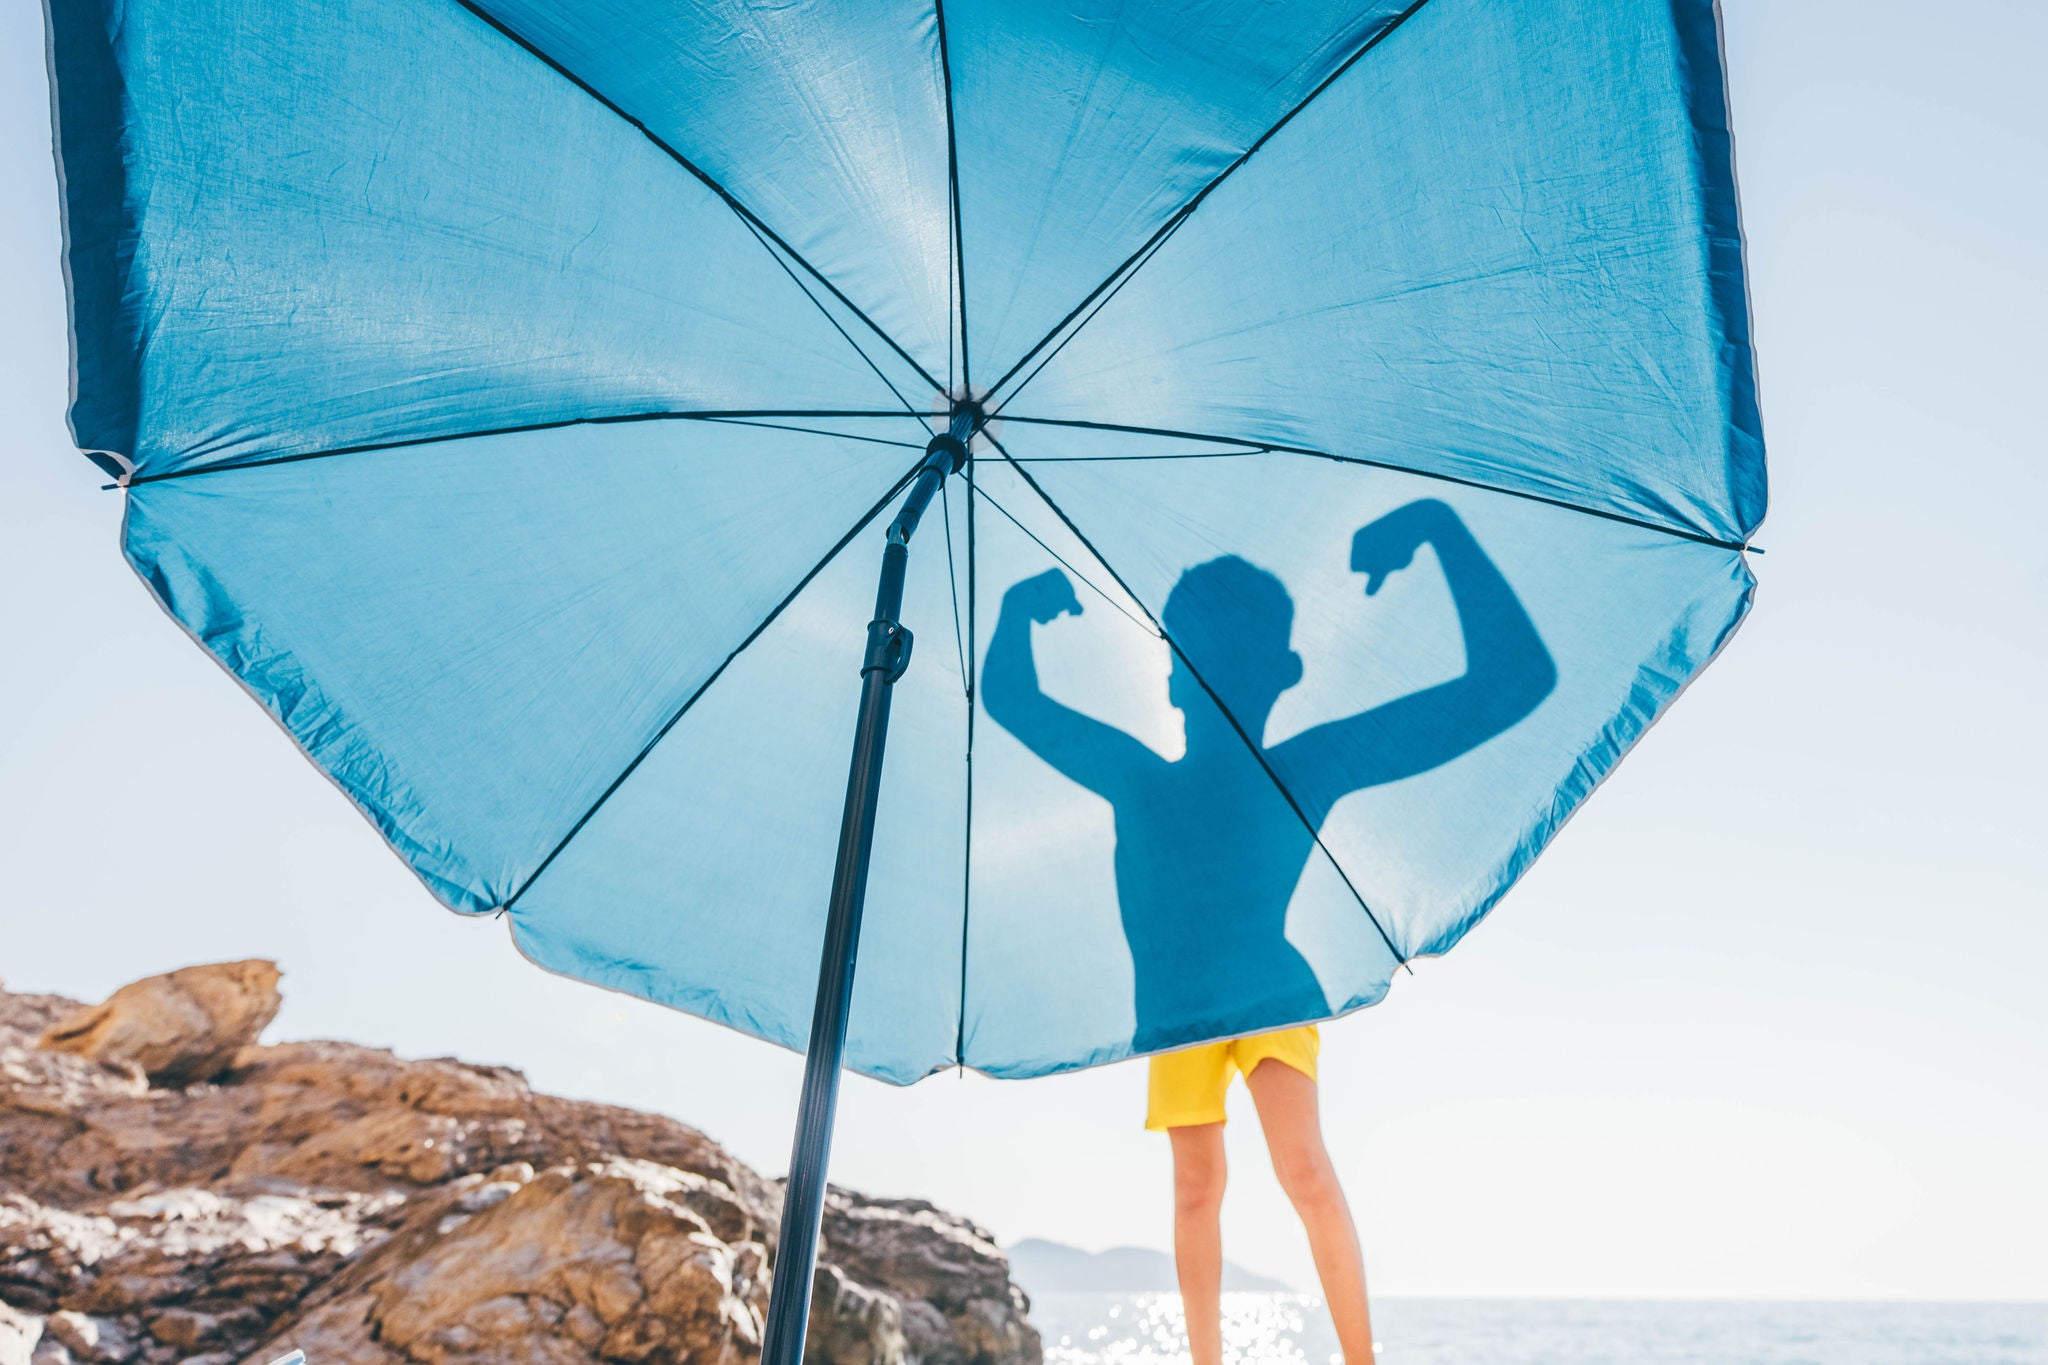 Silhouette of boy flexing his muscles on blue beach umbrella